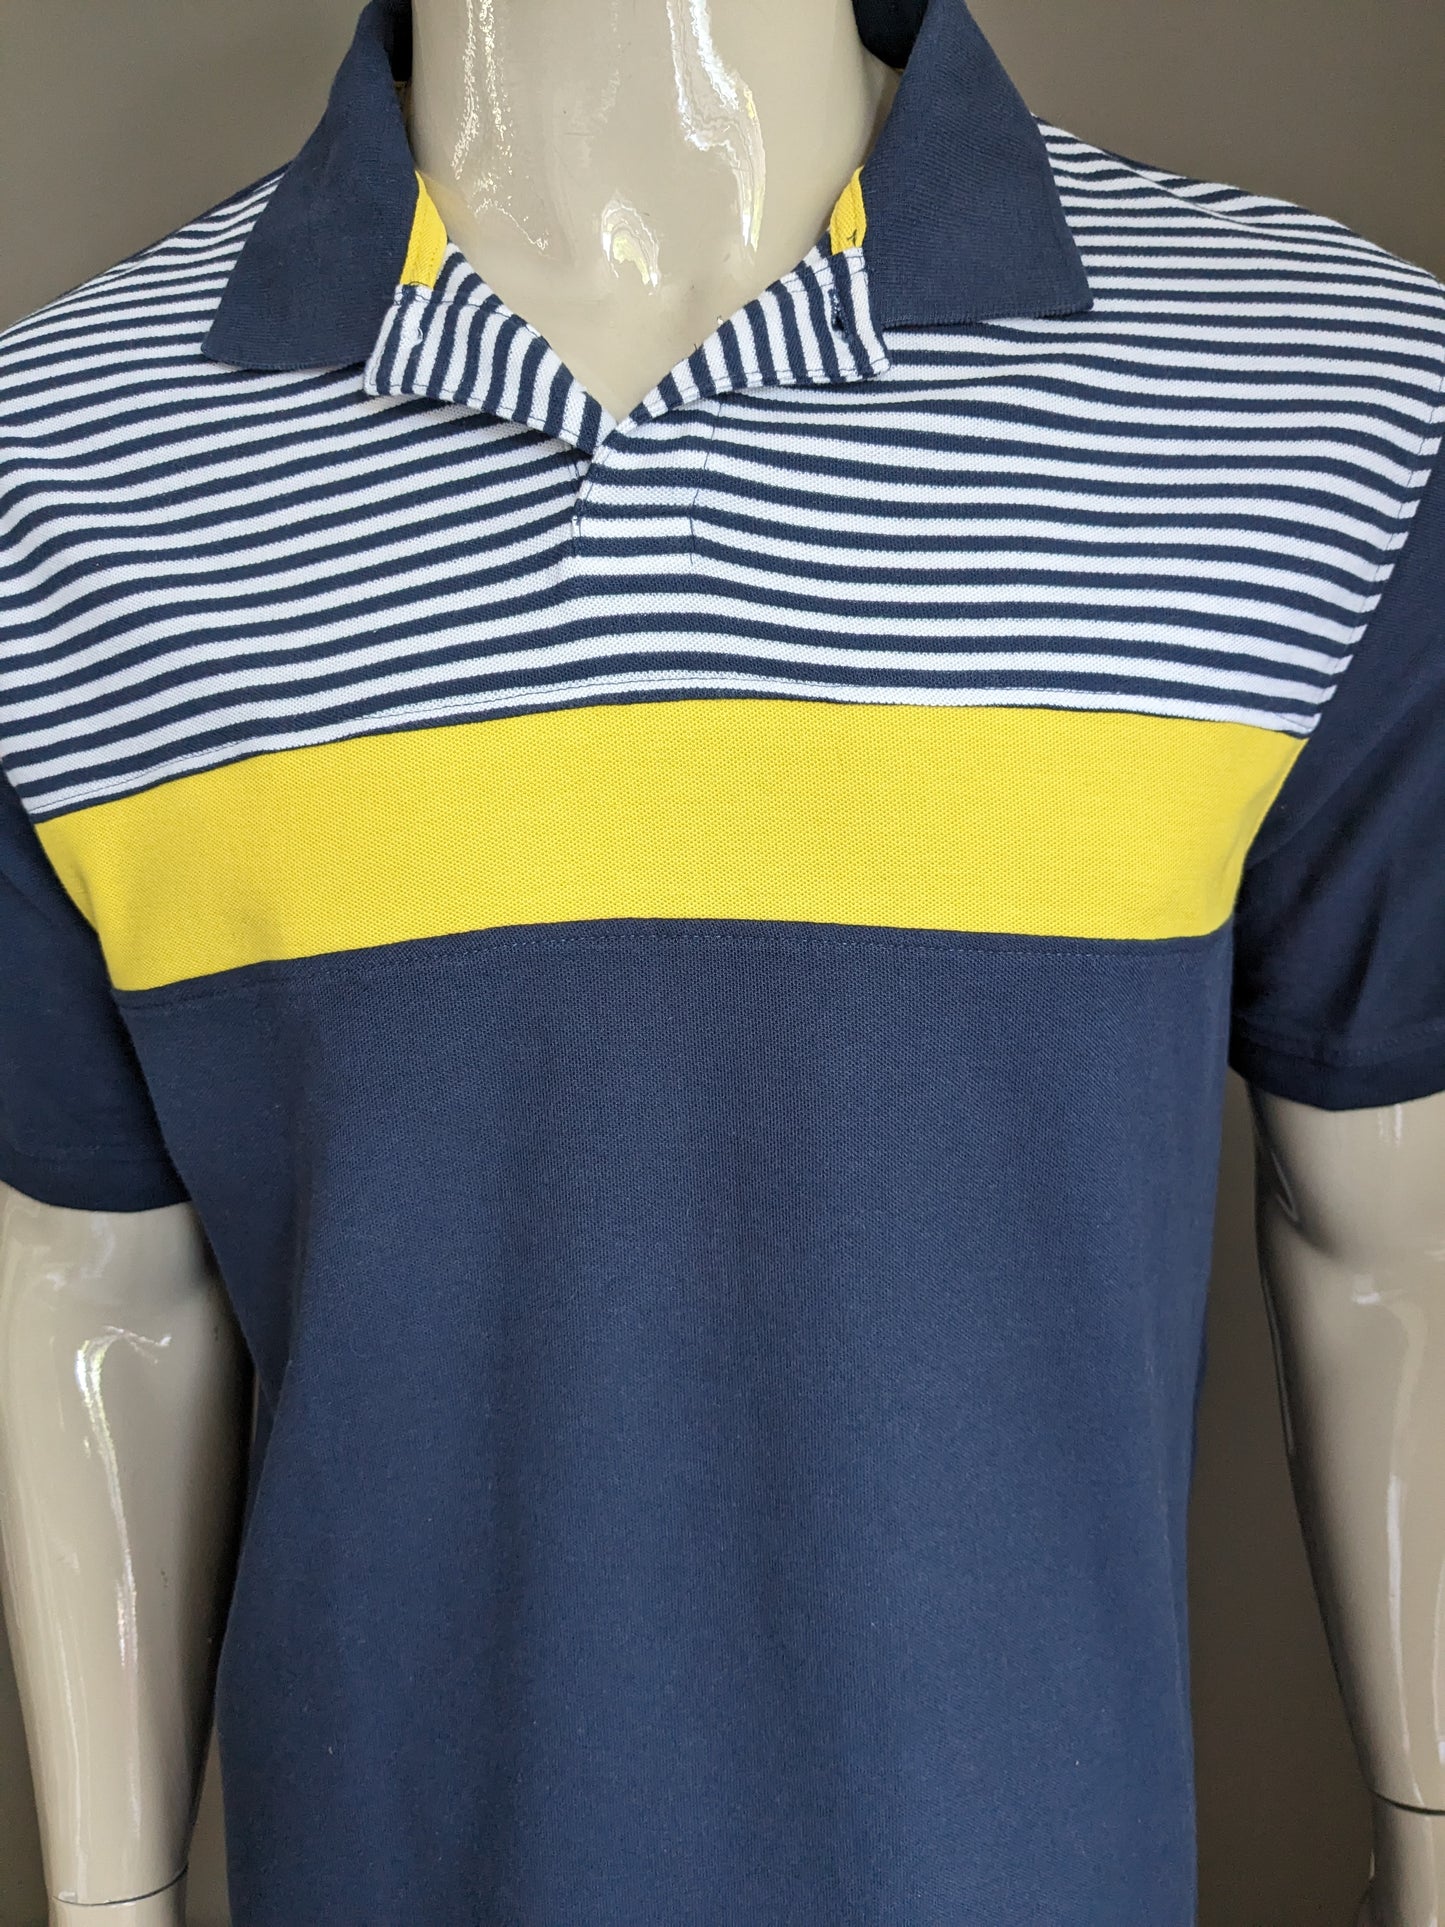 Straight Up Polo. Blue yellow white colored. Size 2XL / XXL.